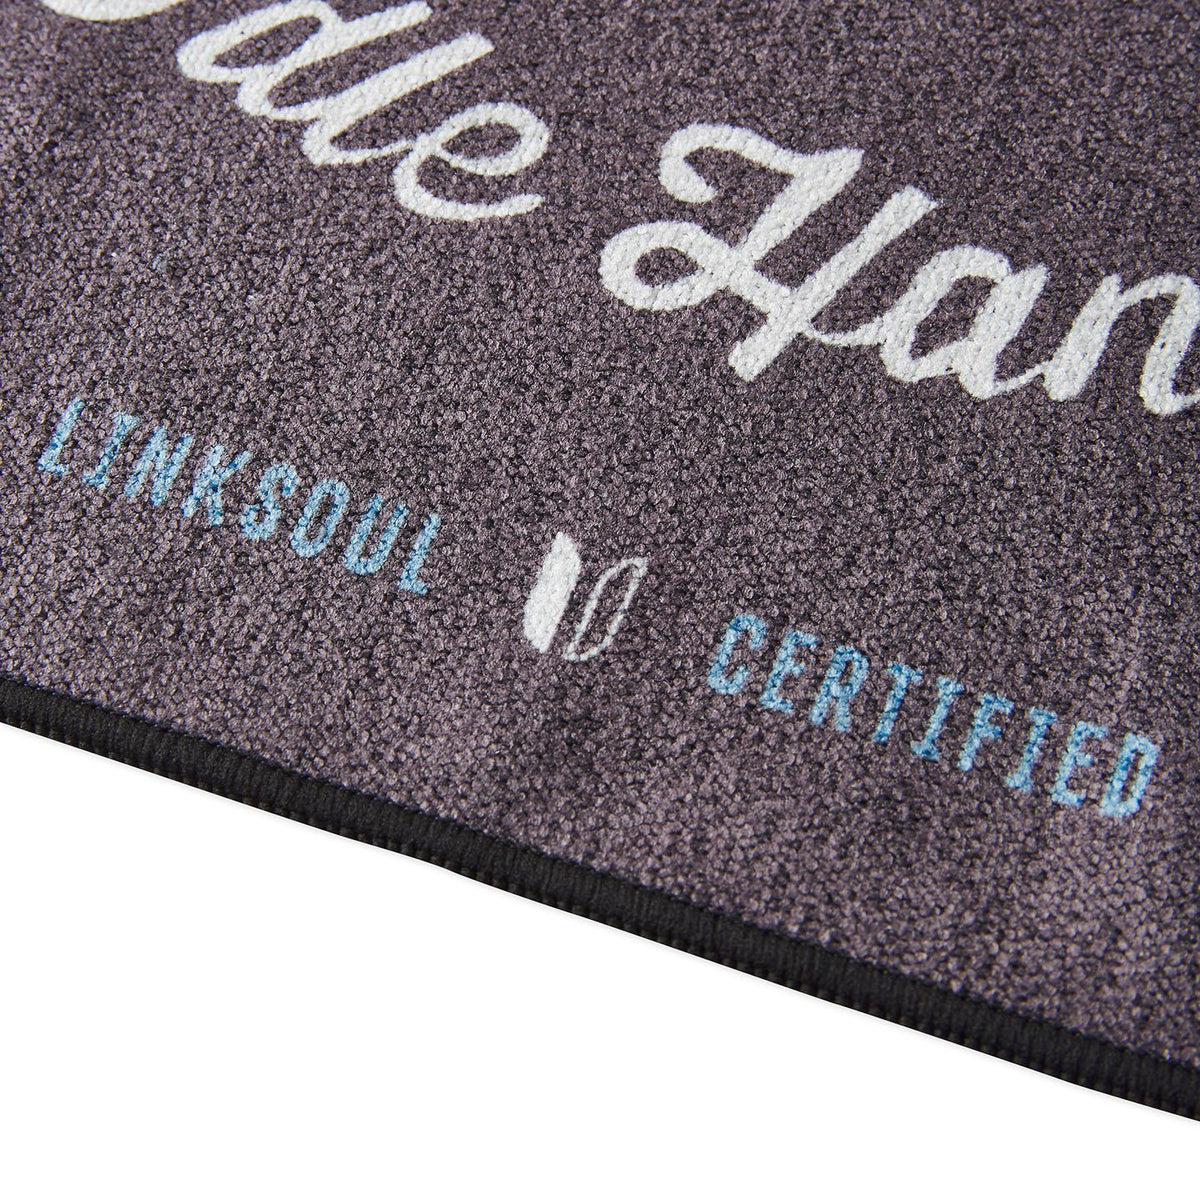 The Idle Golf Towel